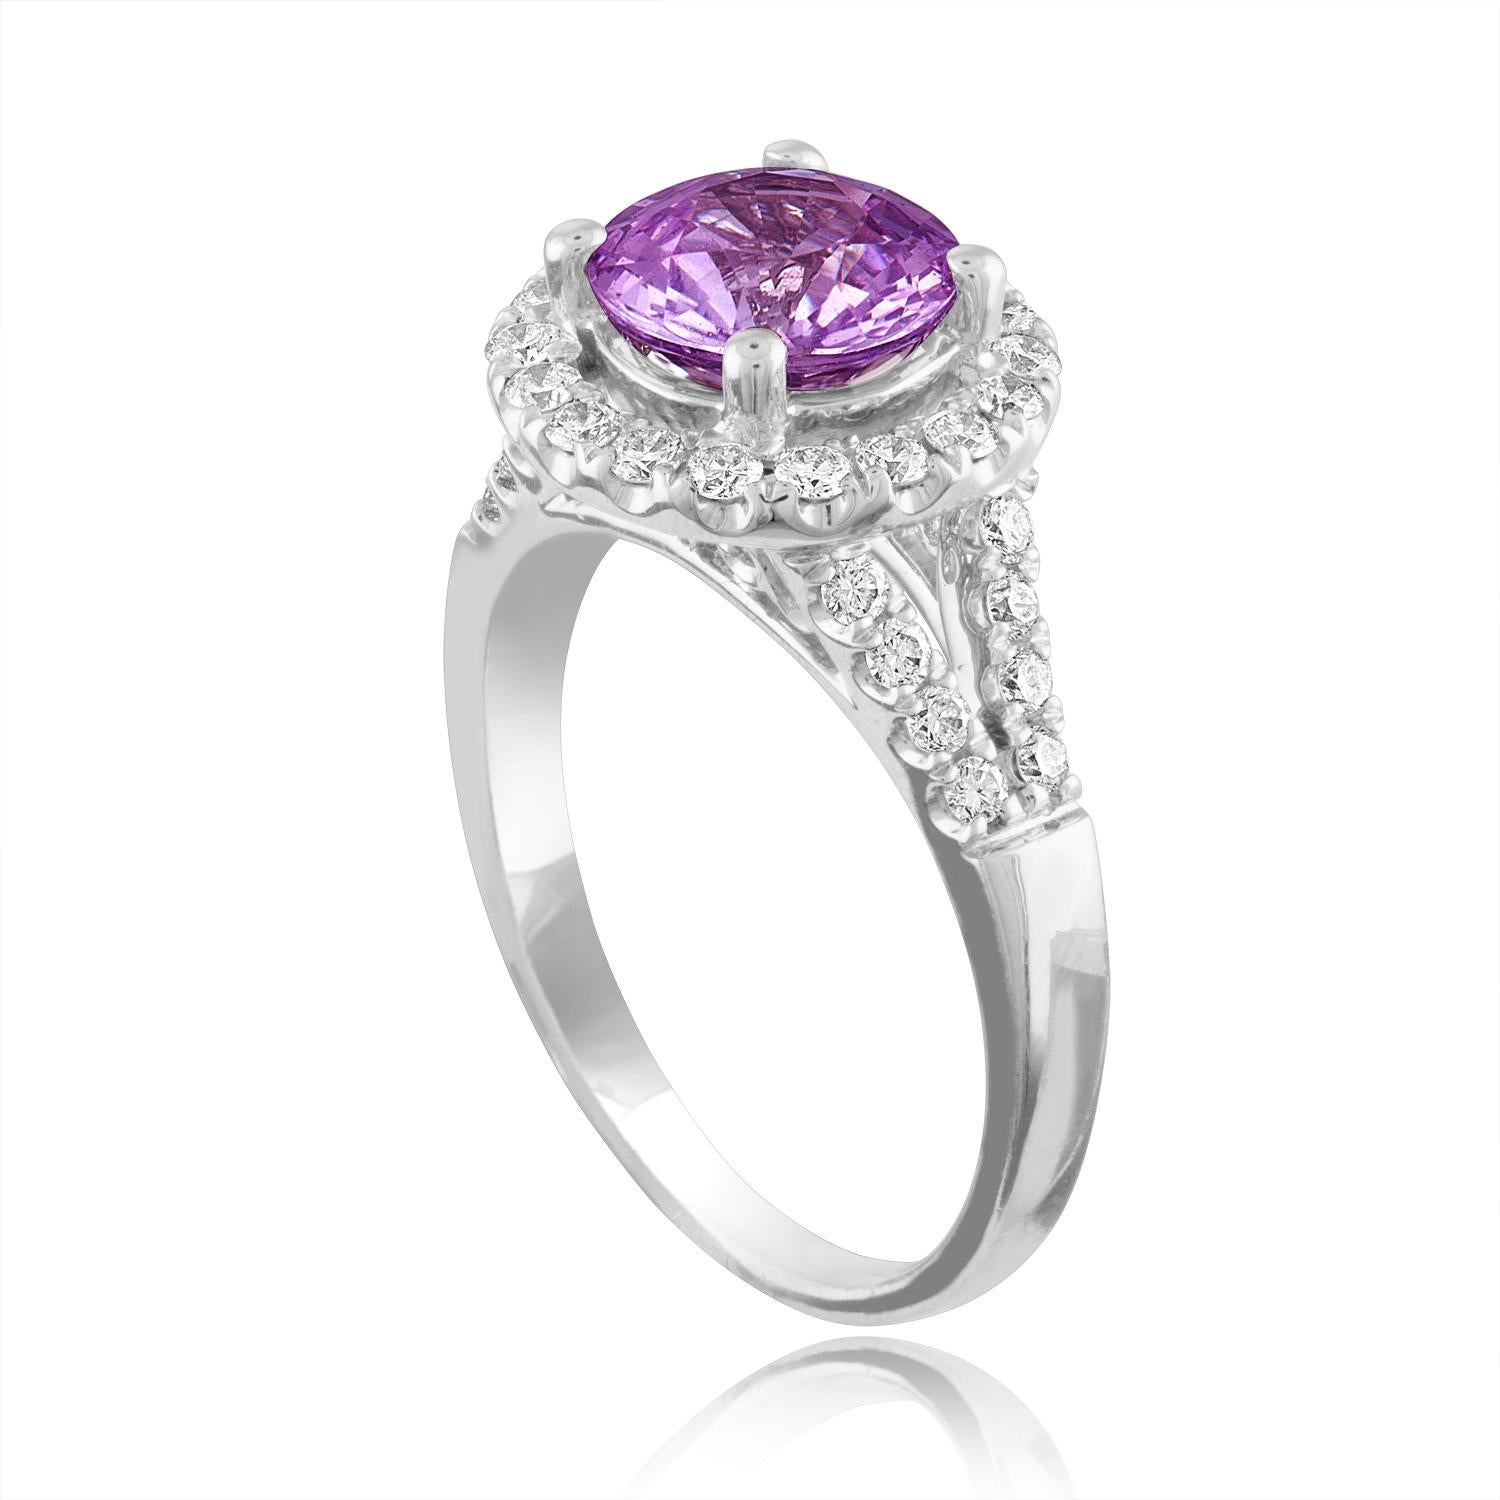 Exquisite Pink Sapphire Halo Ring
The ring is 18K White Gold Ring
The sapphire is a round 2.18 Carats
The sapphire is Pink in color No HEAT
The stone is certified by LAPIS.
The Sapphire changes color depending on light.
There are 0.60 Carats in